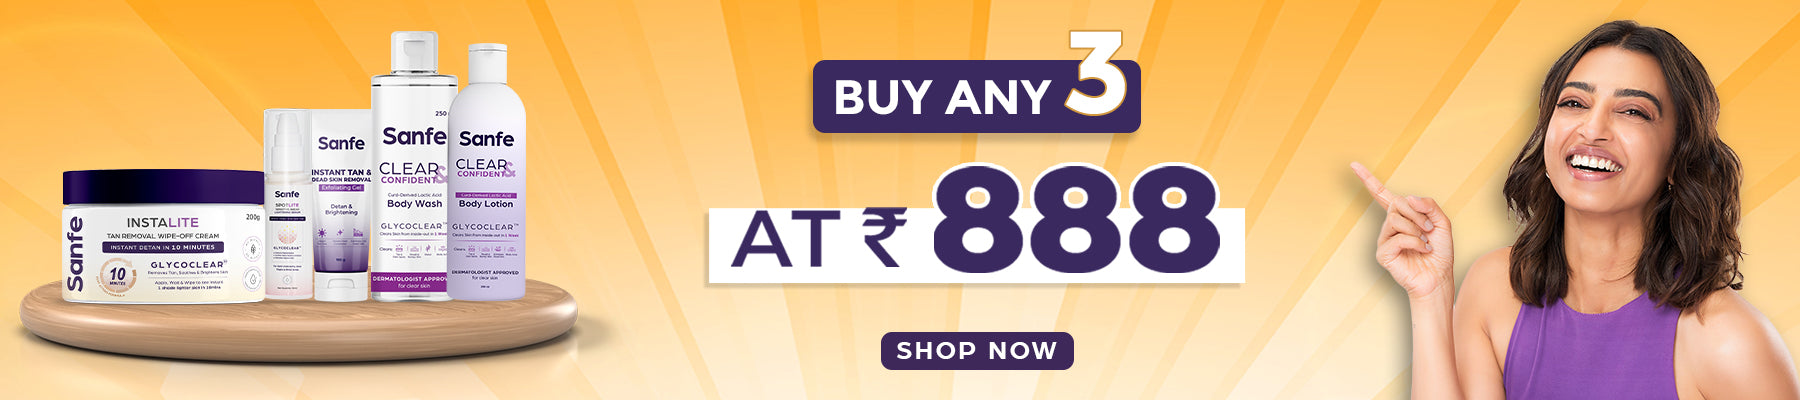 BUY ANY 3 PRODUCTS FOR ₹777